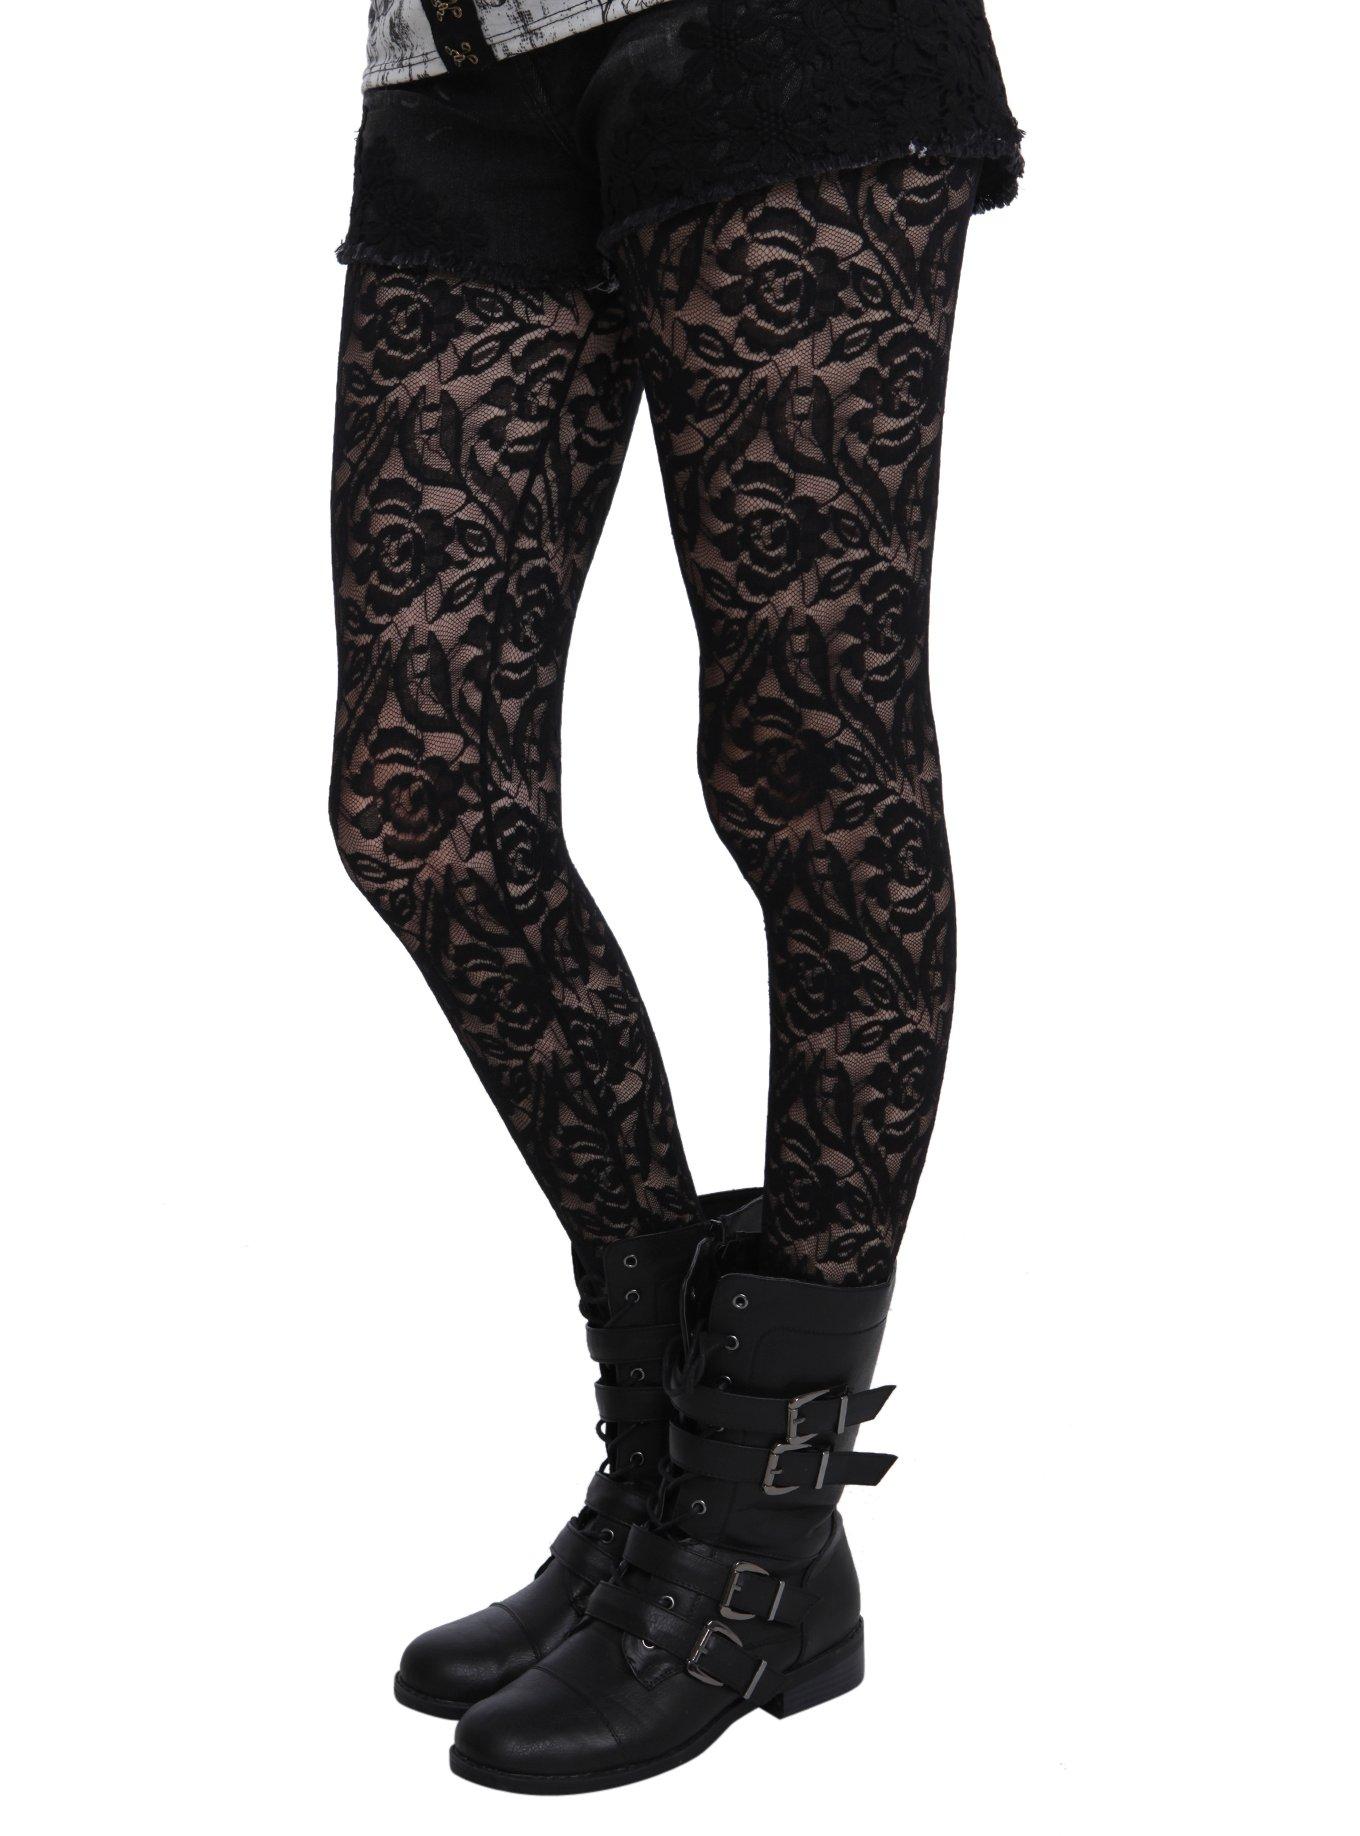 Black Lace Tights | Hot Topic